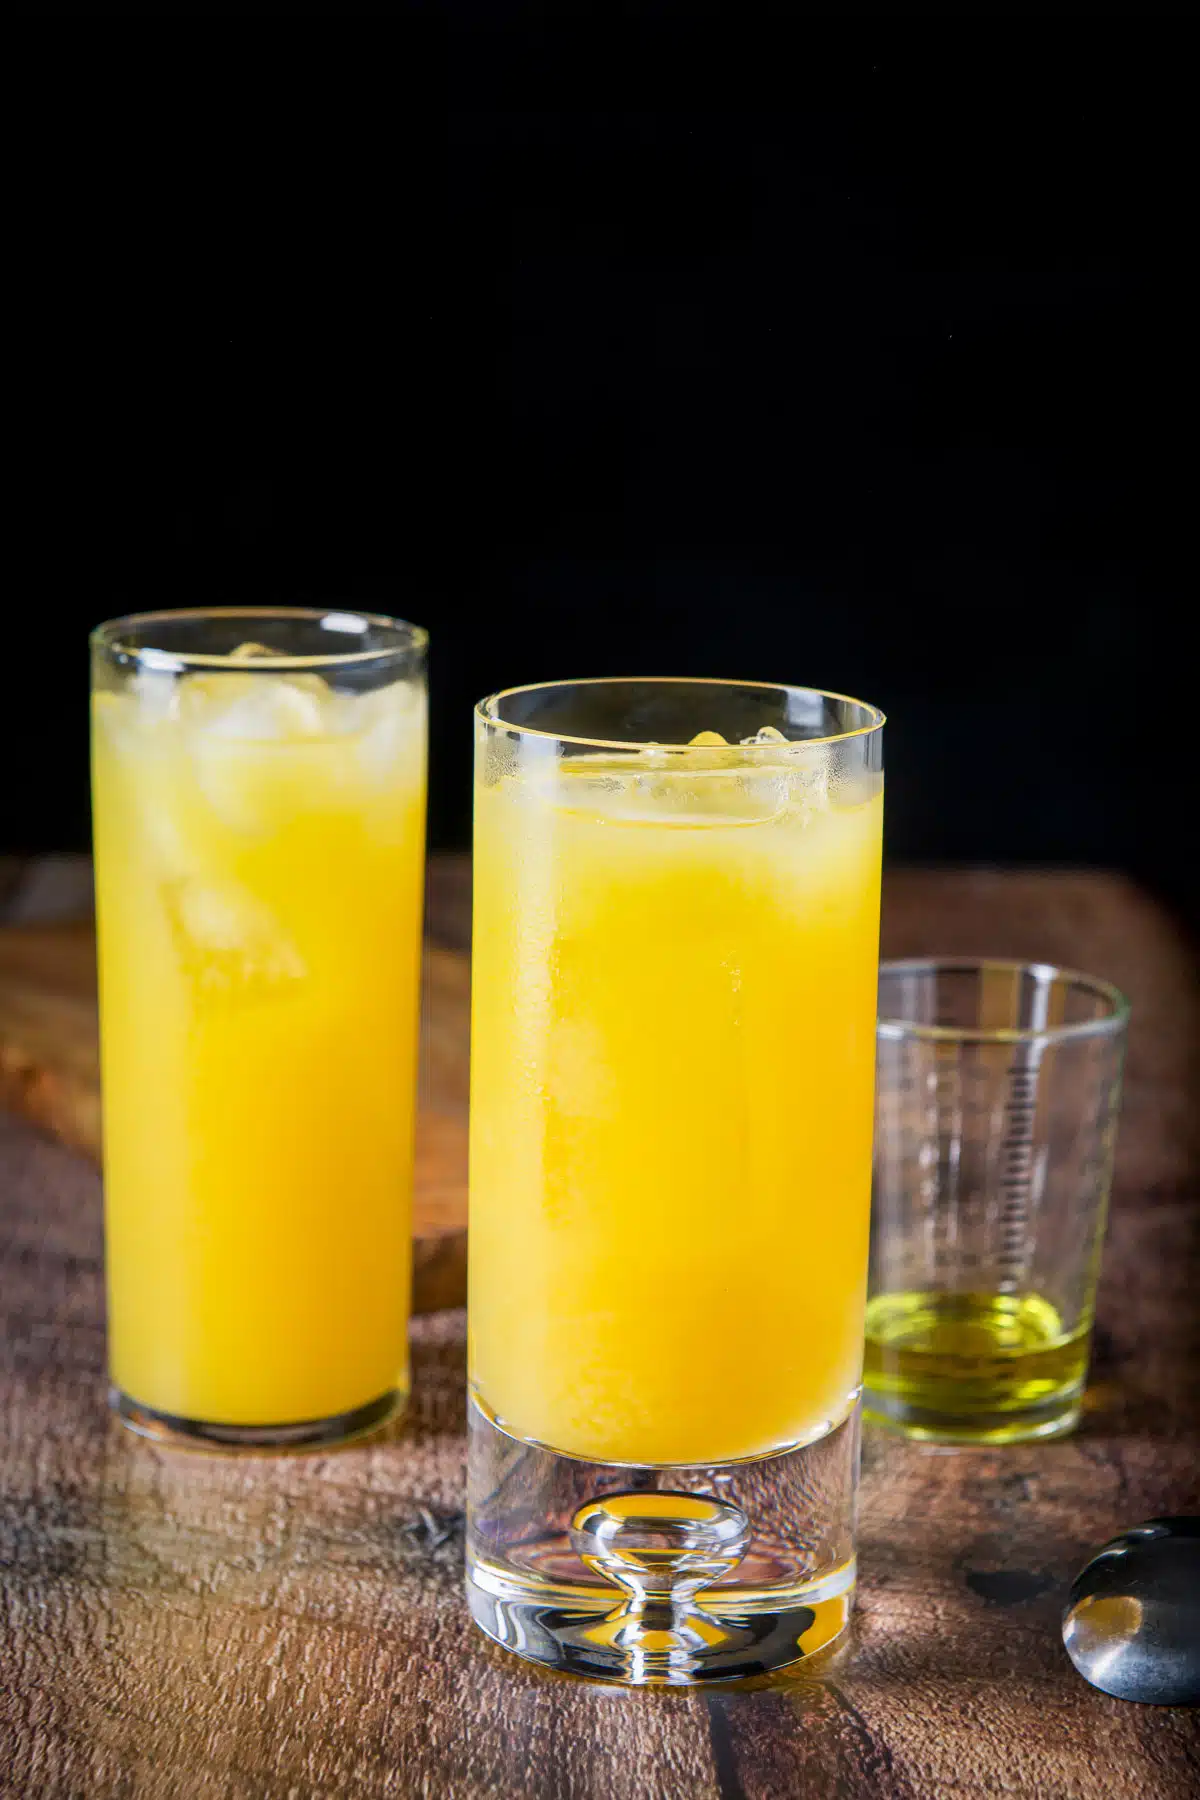 The orange juice poured into the glasses with galliano in the back